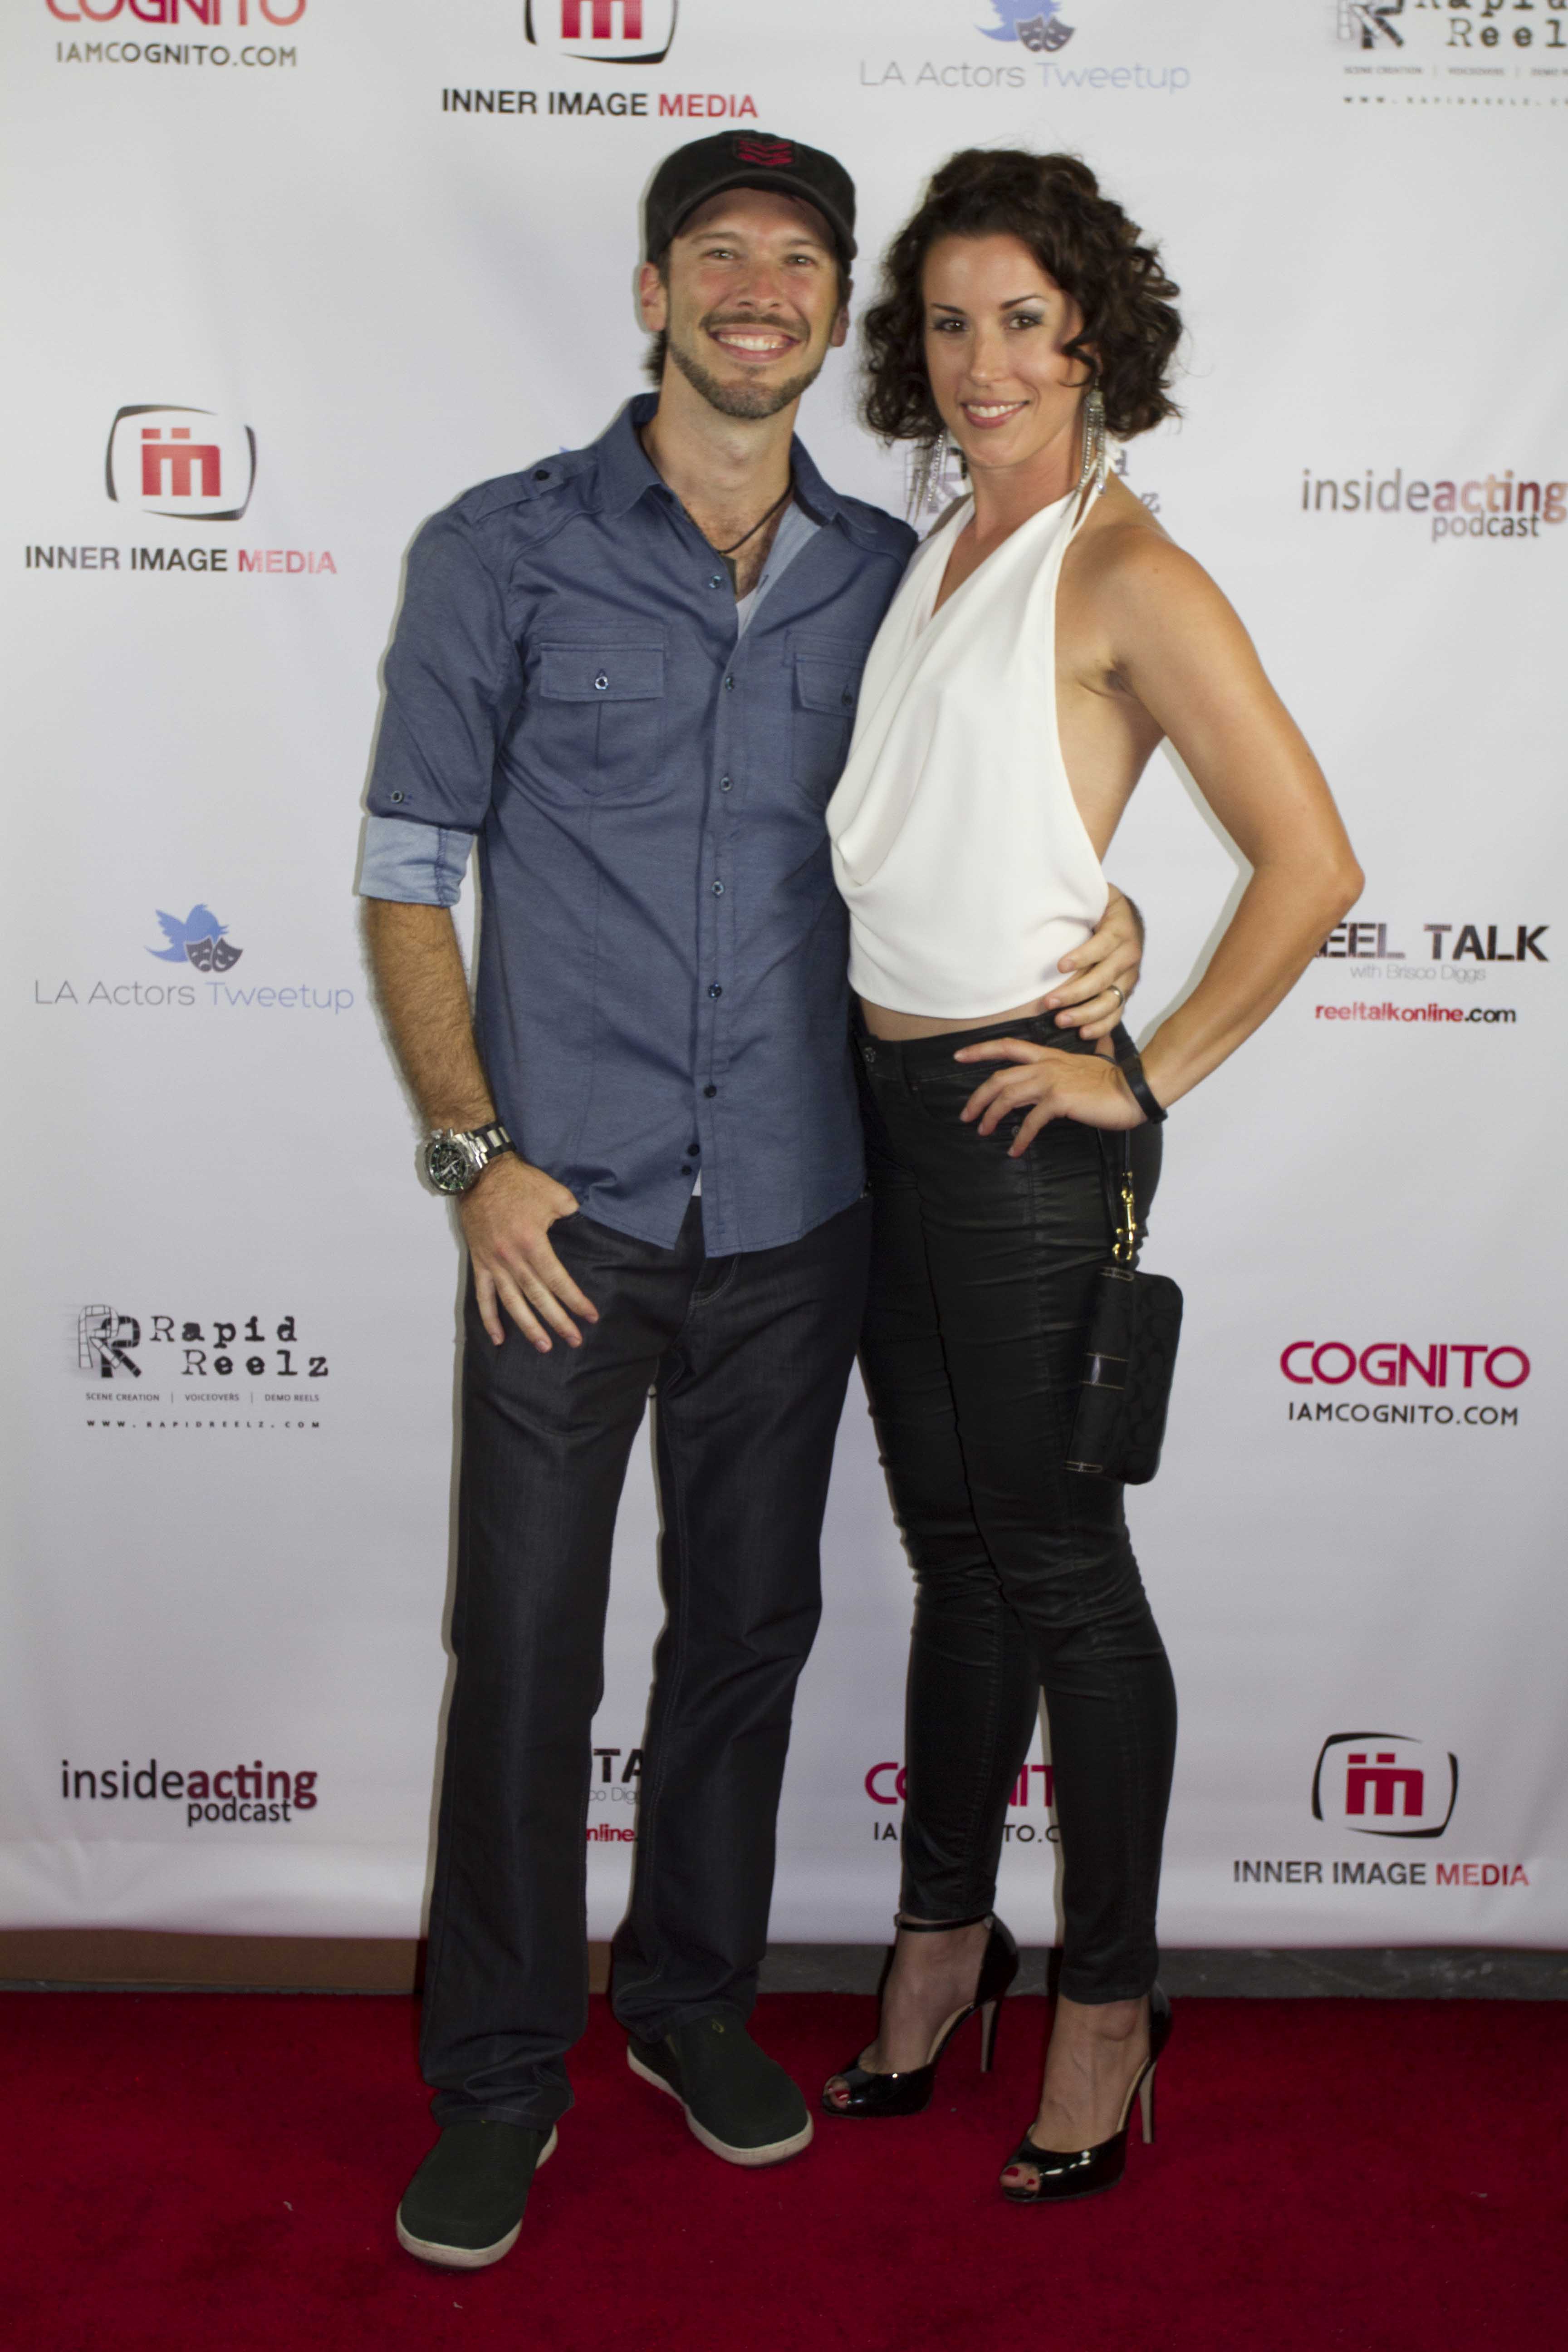 Kelly Kula and manager Matt Prater of Dedicated Talent Management at the REEL TALK Launch Party